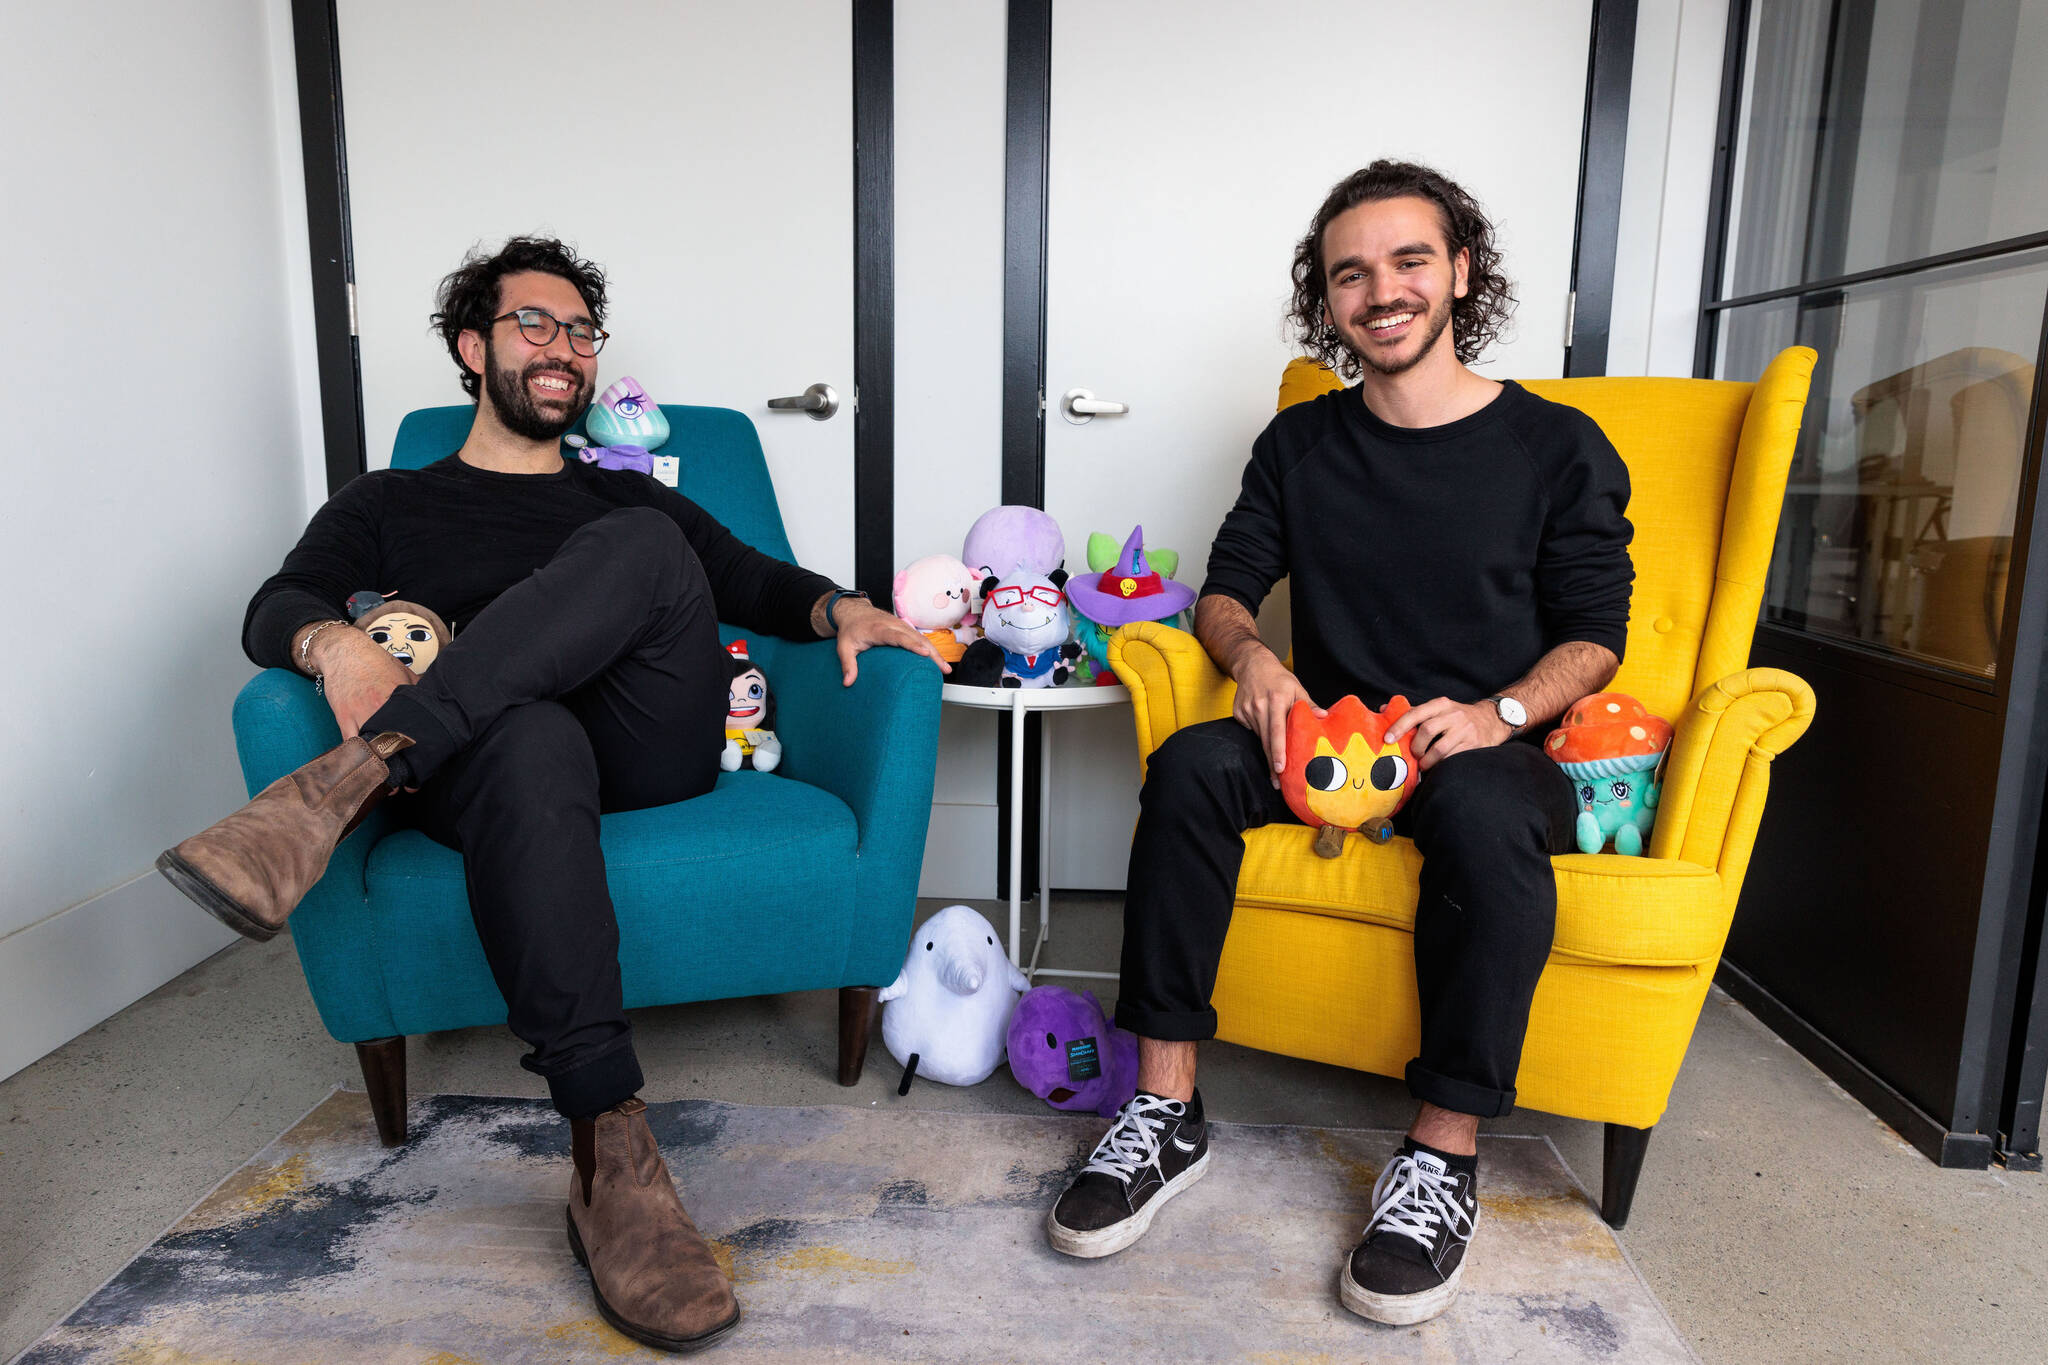 The co-founders of Makeship, Pablo Eder (left) Rakan Al-Shawaf (right), pictured with Makeship plushies (photo provided by Rachael D’Amore).